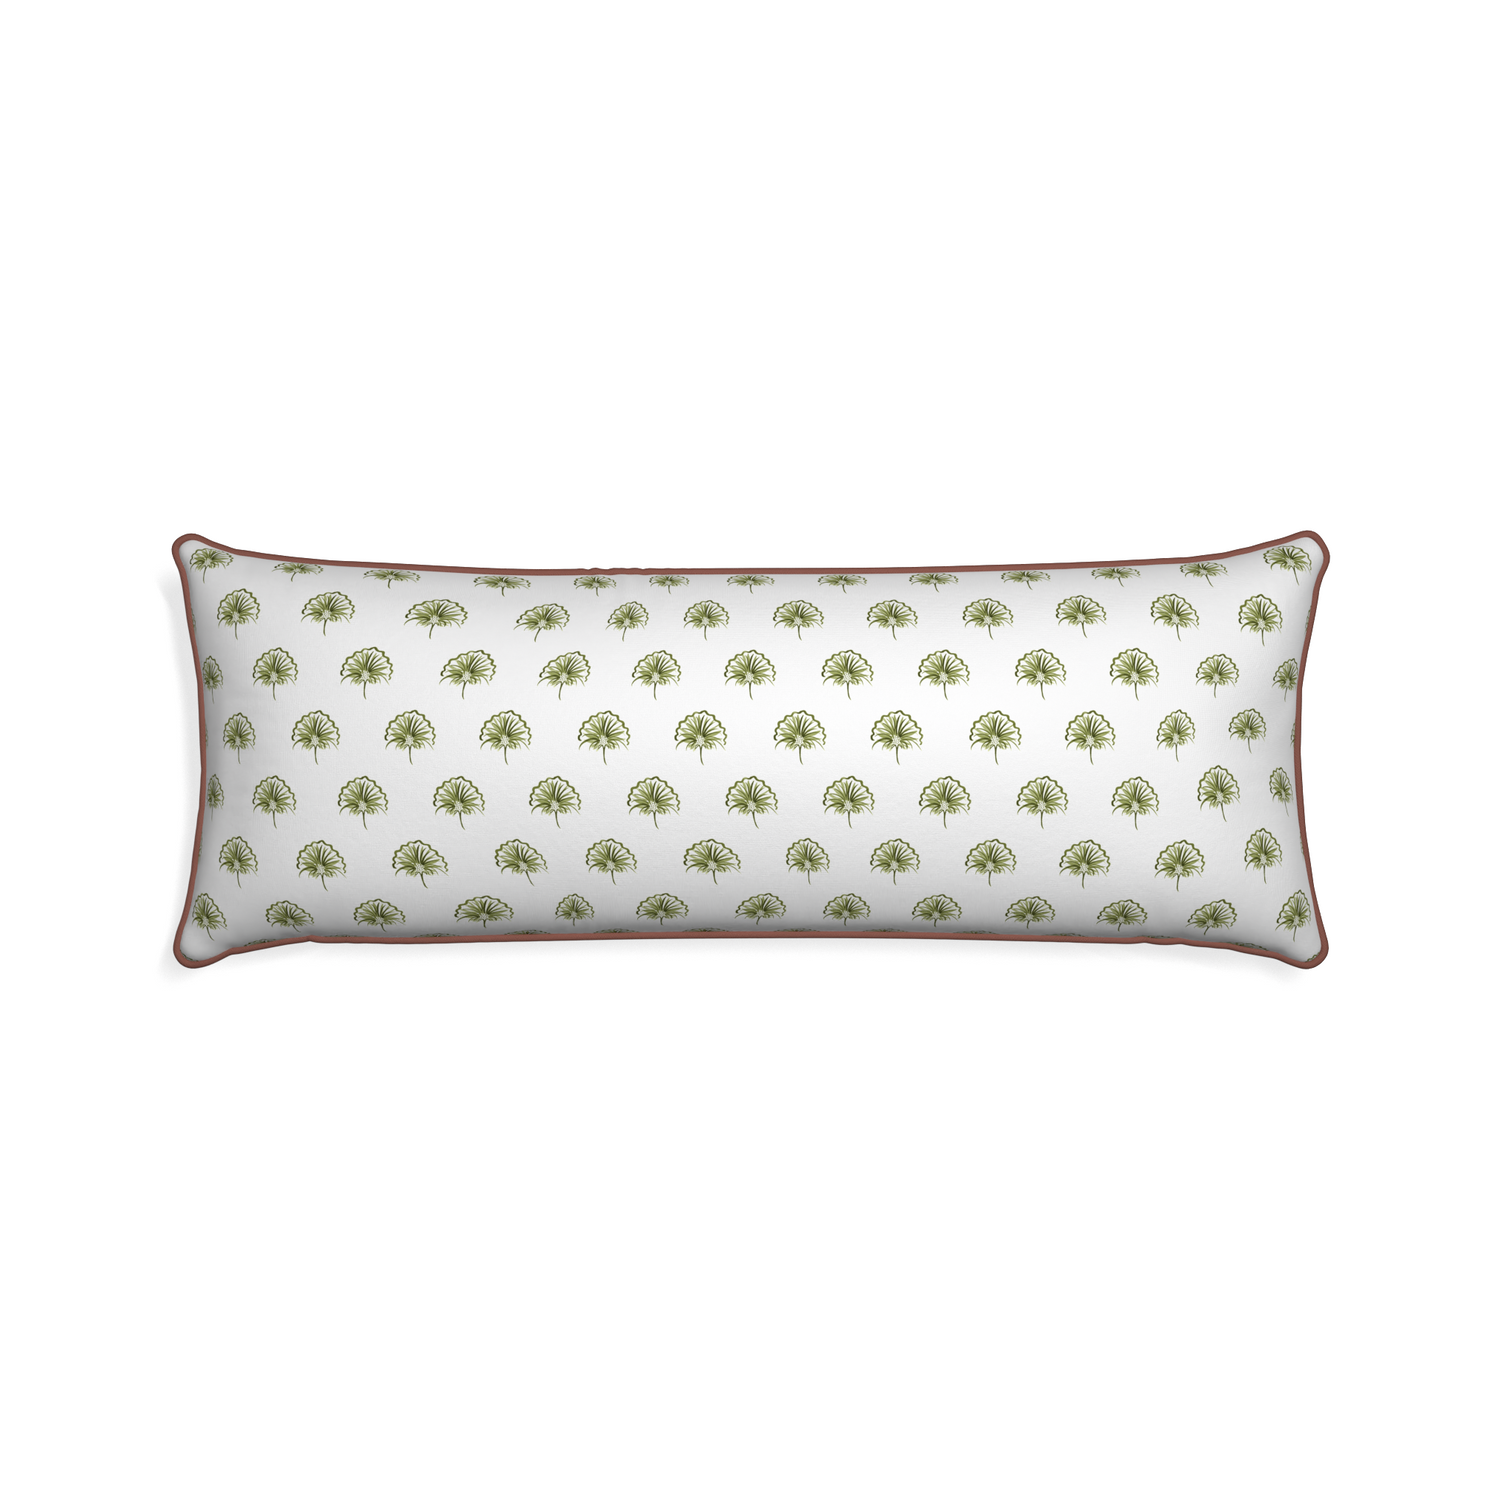 Xl-lumbar penelope moss custom green floralpillow with w piping on white background